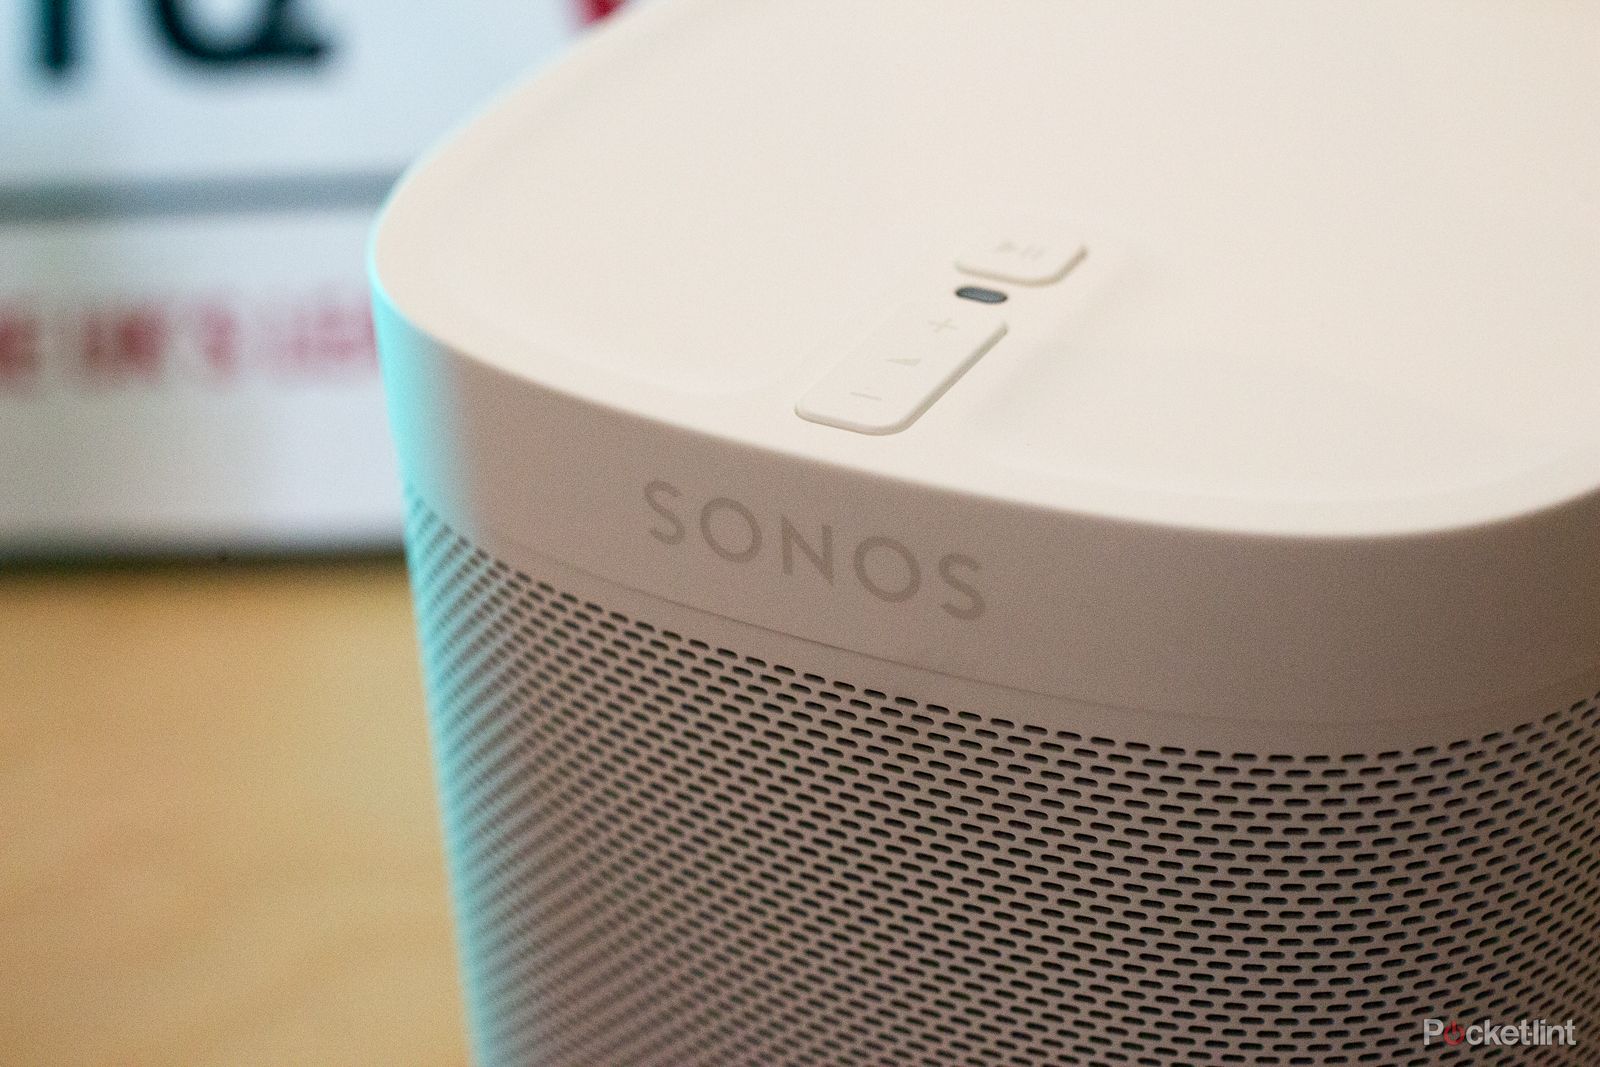 sonos now works with amazon prime music properly image 1